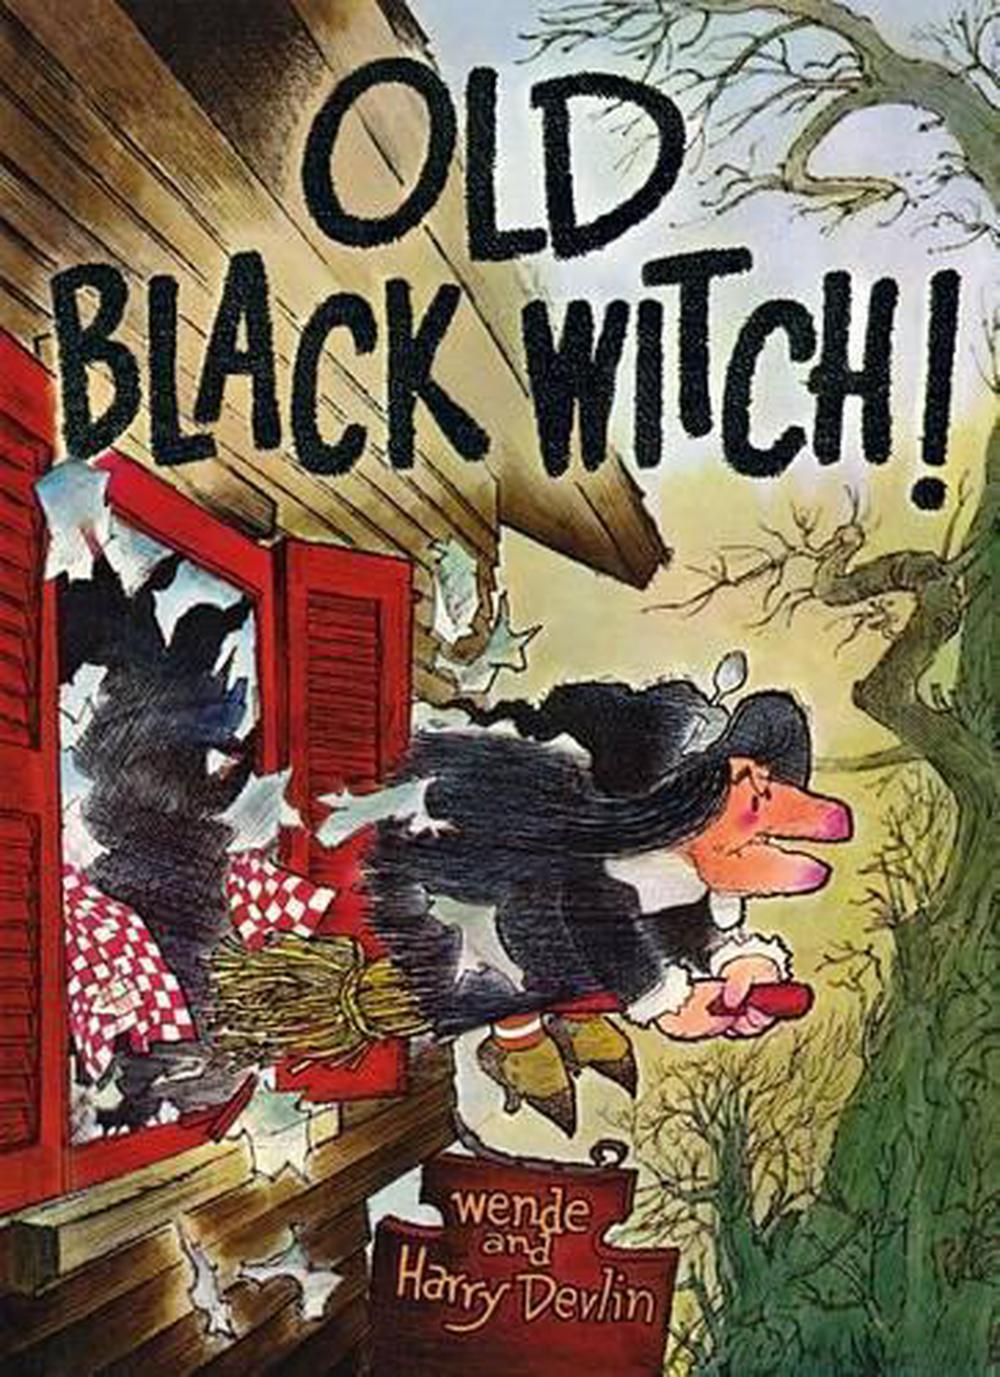 the black witch book 3